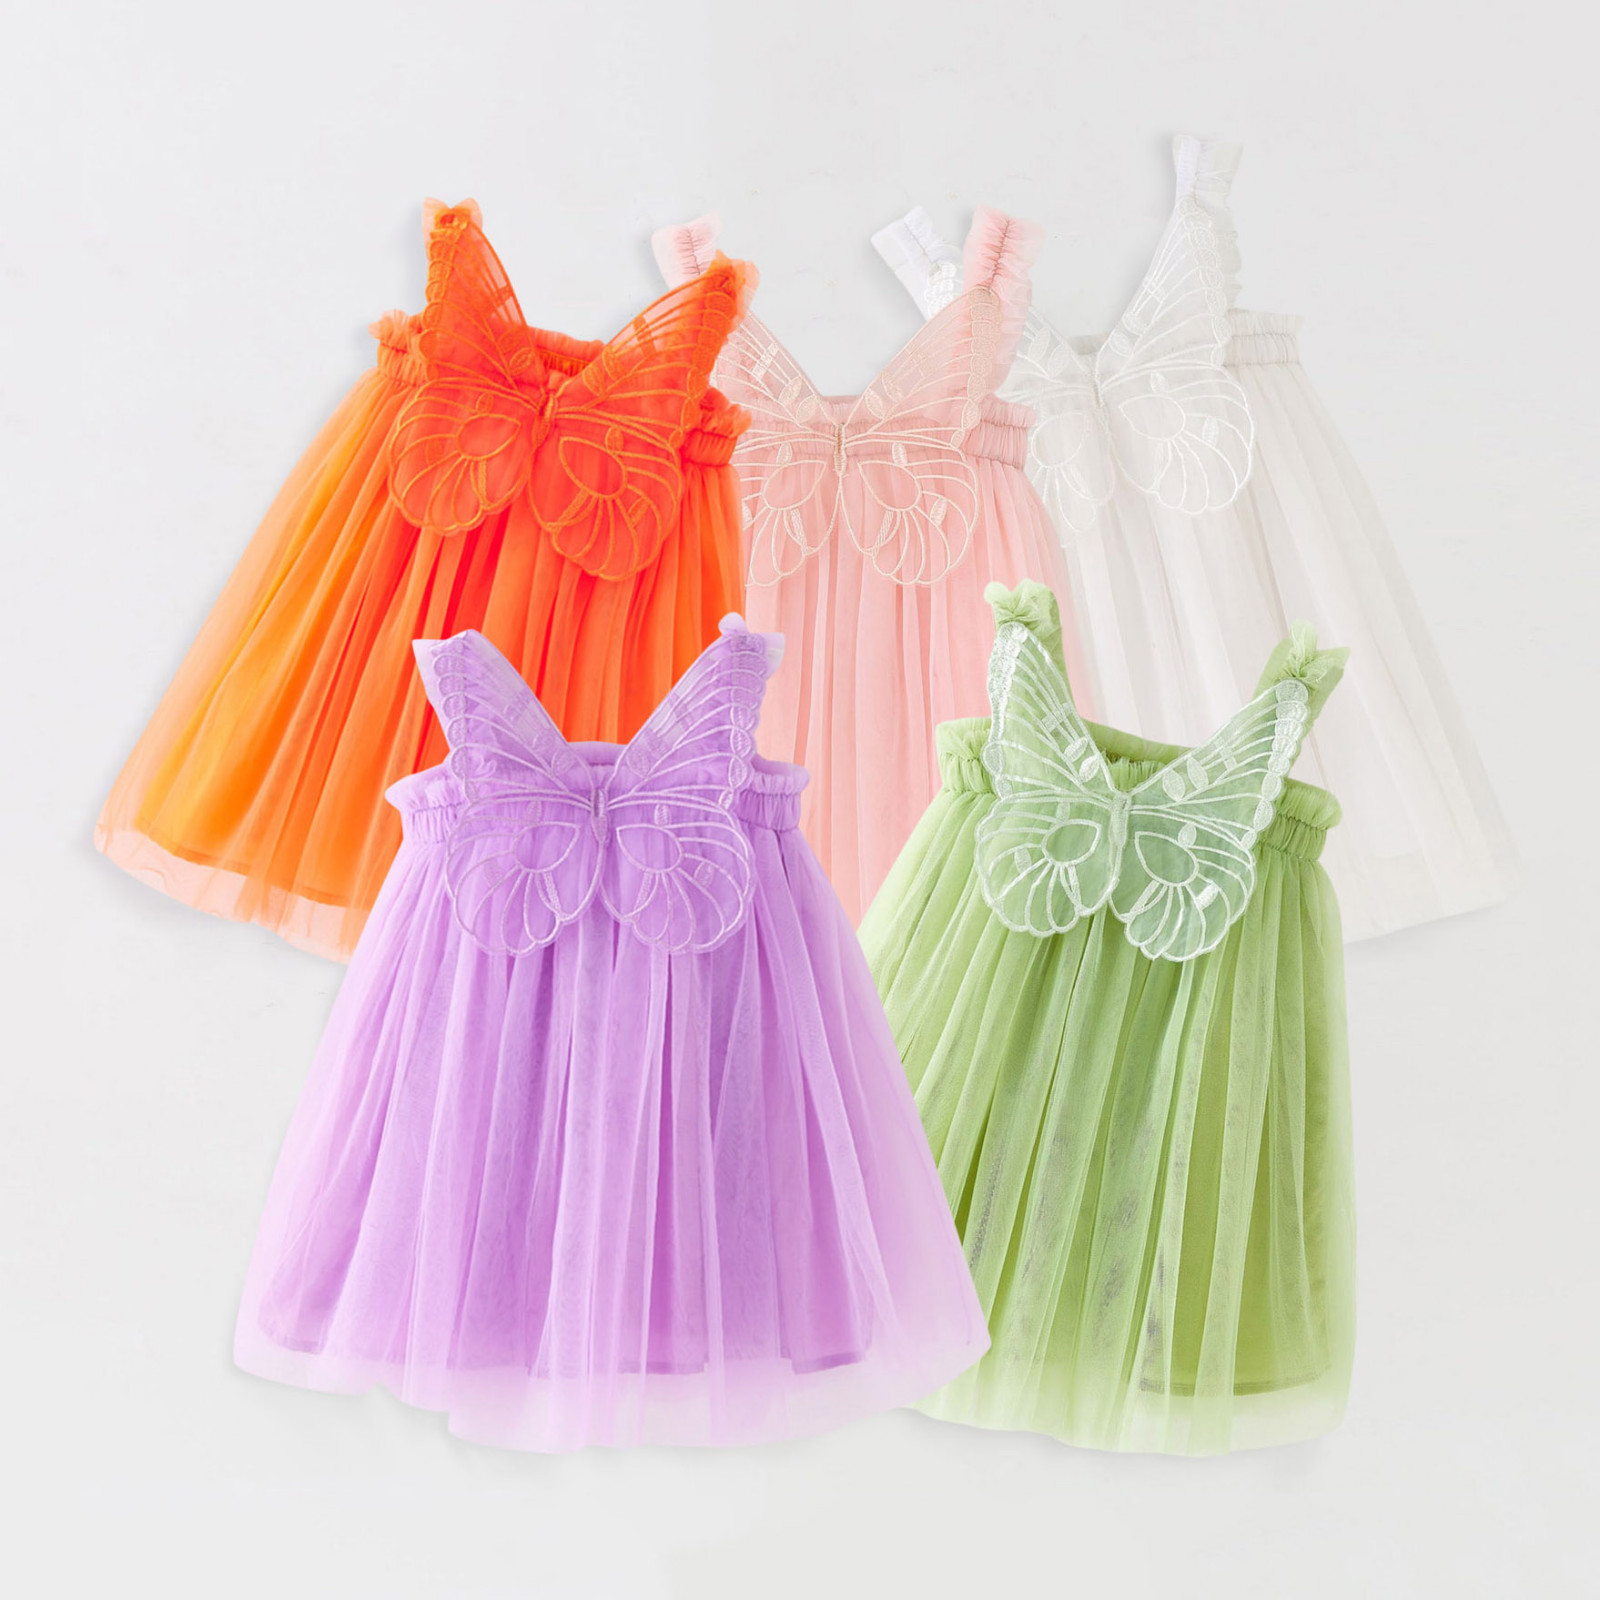 Dresses for Teens Sleeveless Butterfly Tulle Suspenders Dance Party ...